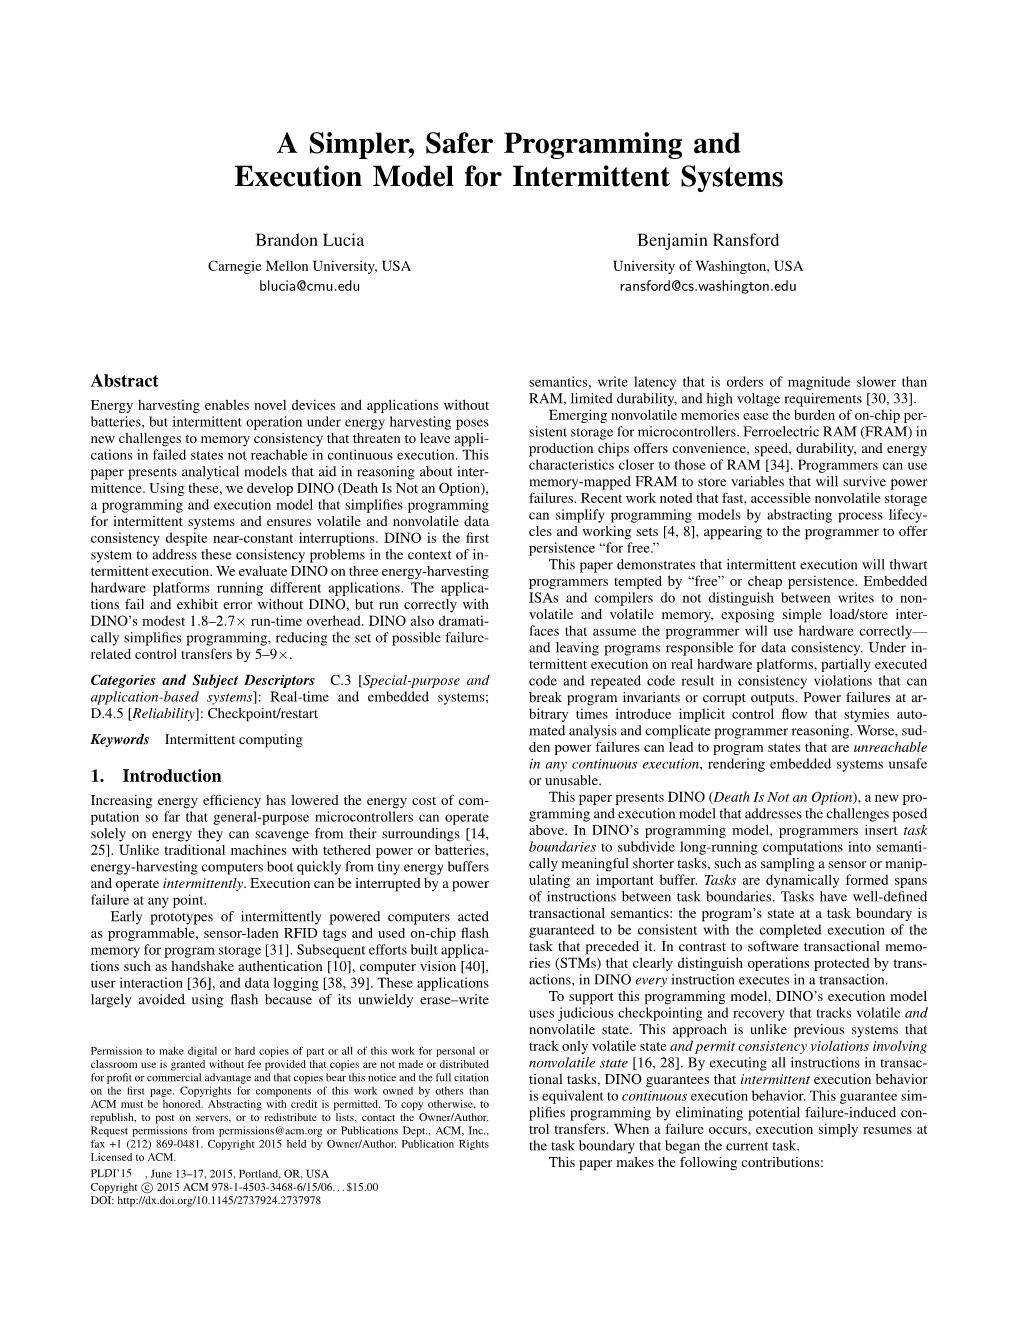 A Simpler, Safer Programming and Execution Model for Intermittent Systems